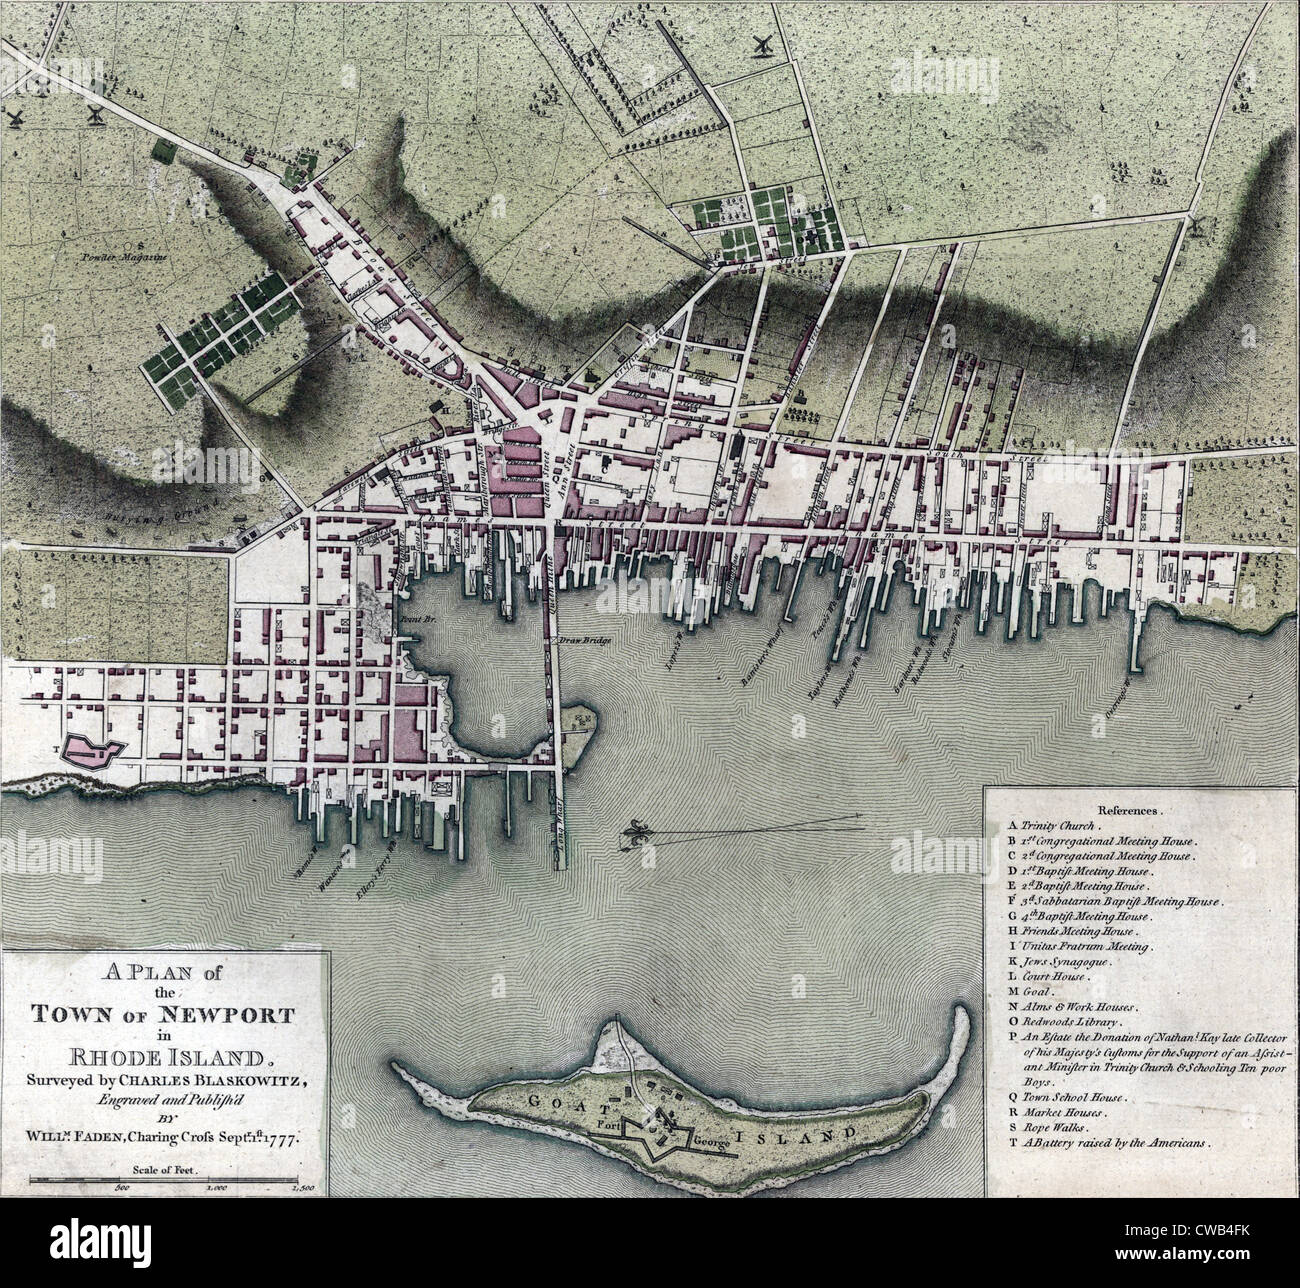 Maps. A plan of the town of Newport in Rhode Island. Surveyed by Charles Blaskowitz, engraved and publish'd by Willm. Faden. Stock Photo